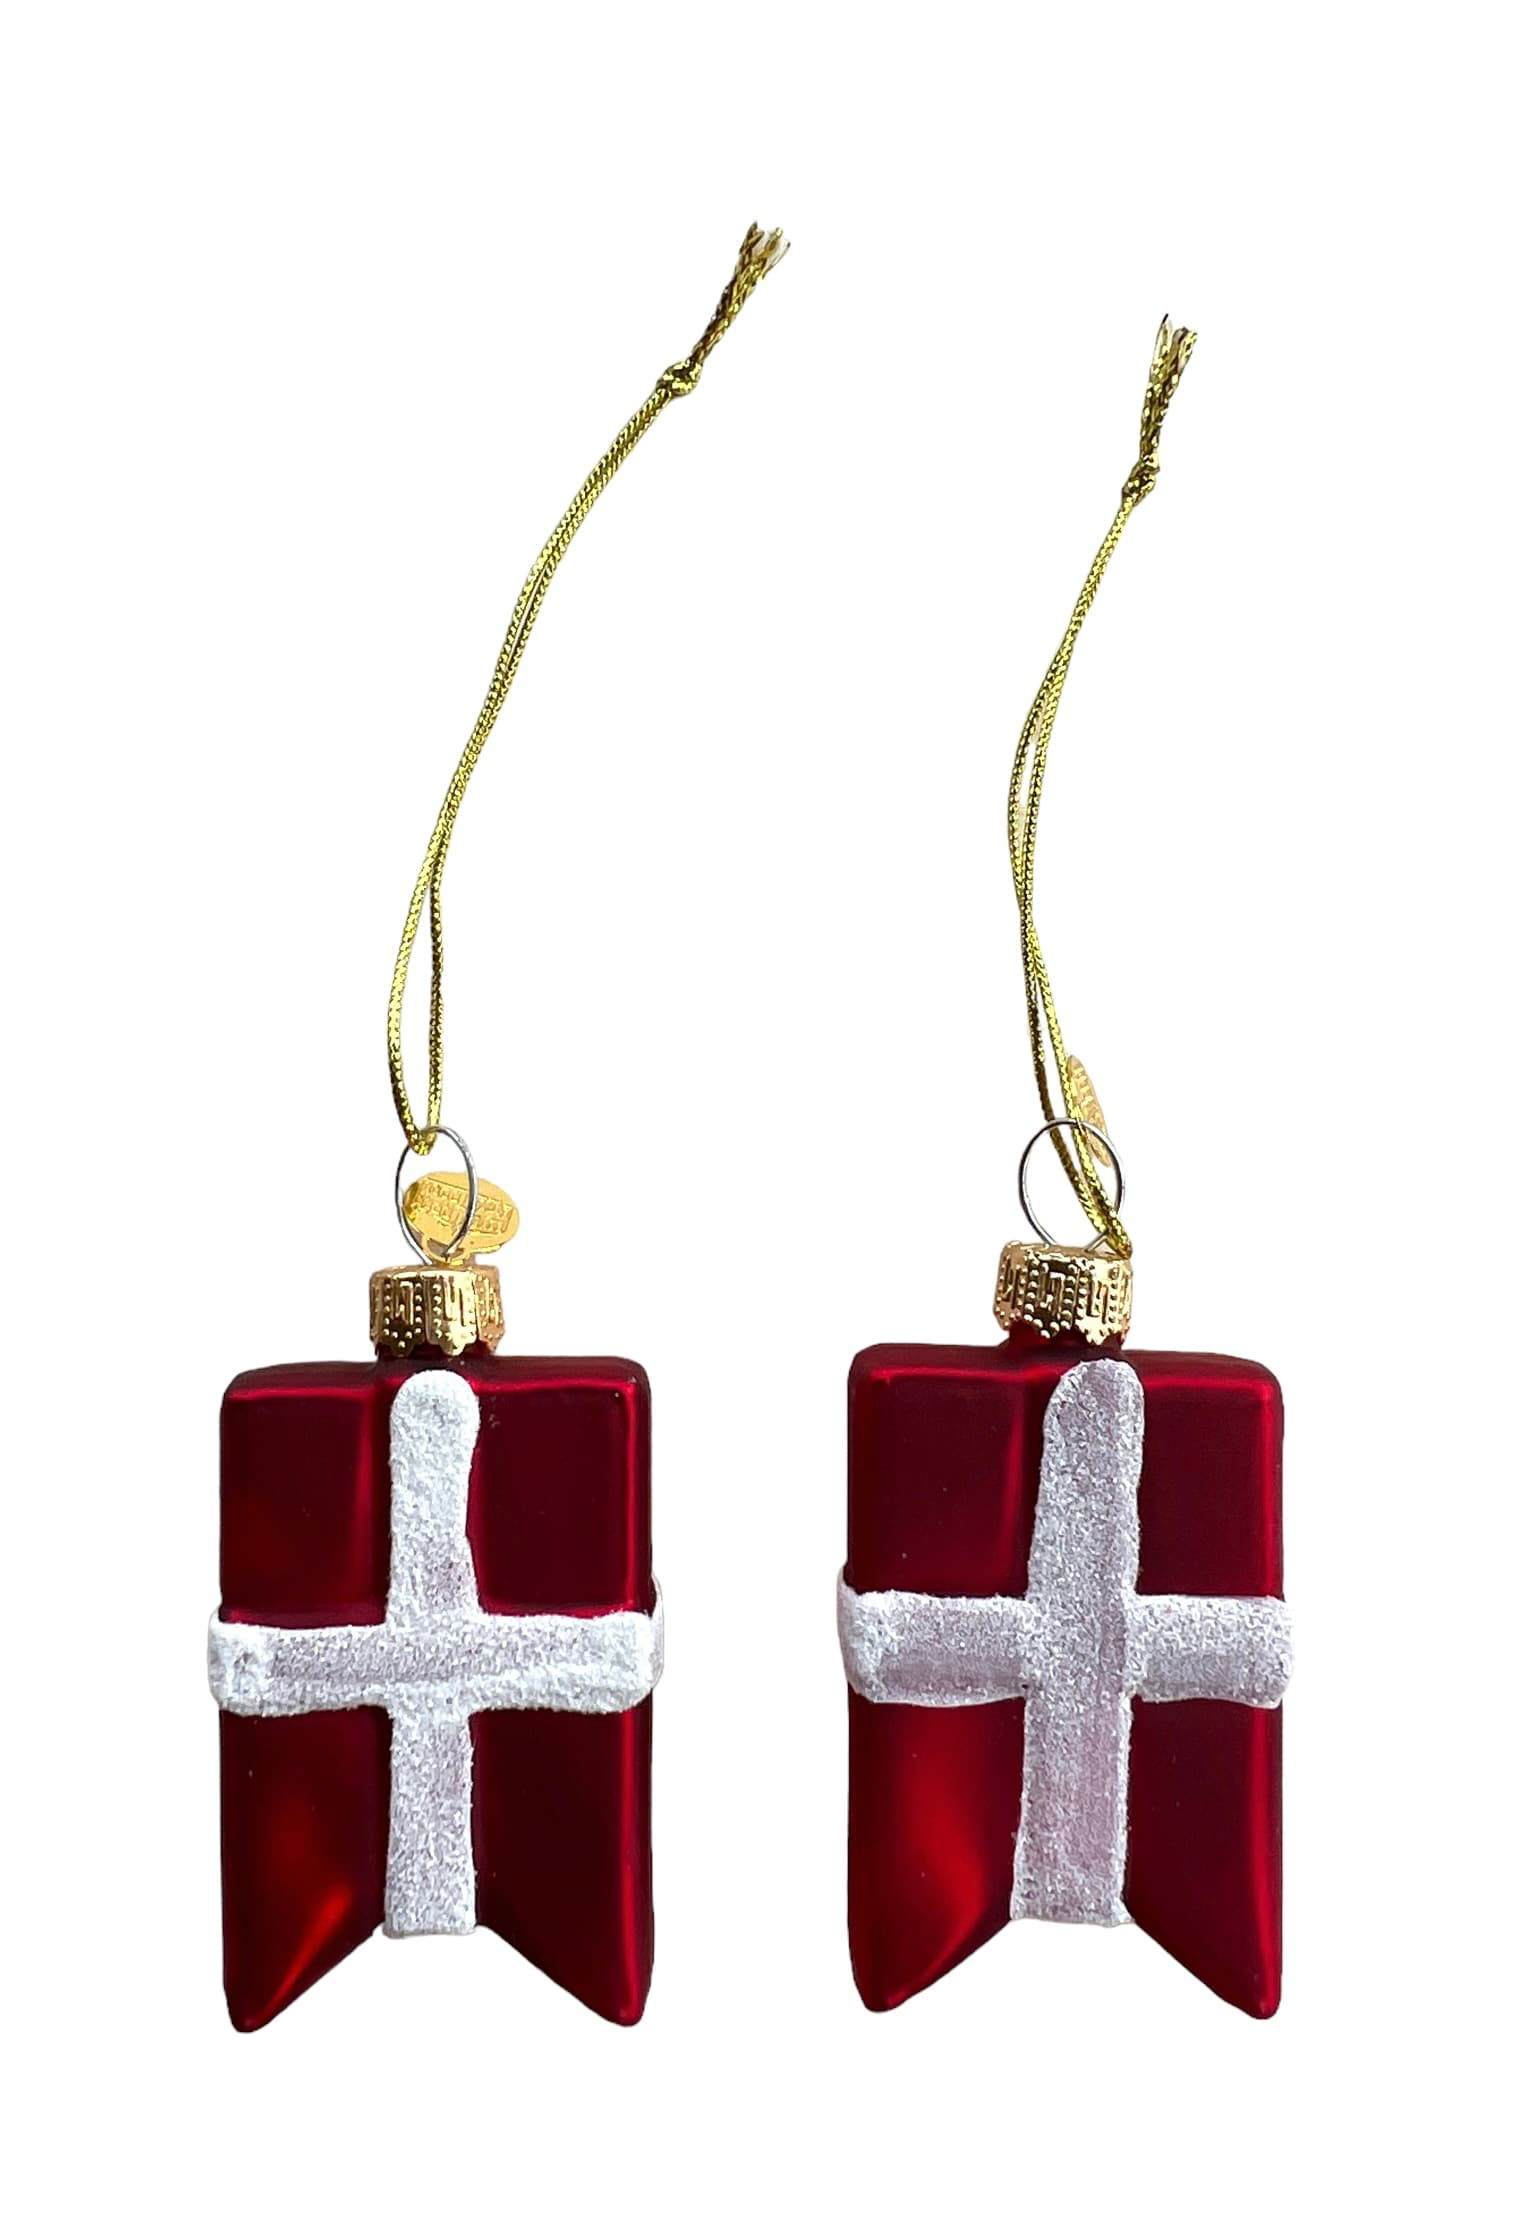 Danish flags in glass for hanging, 2 pcs 